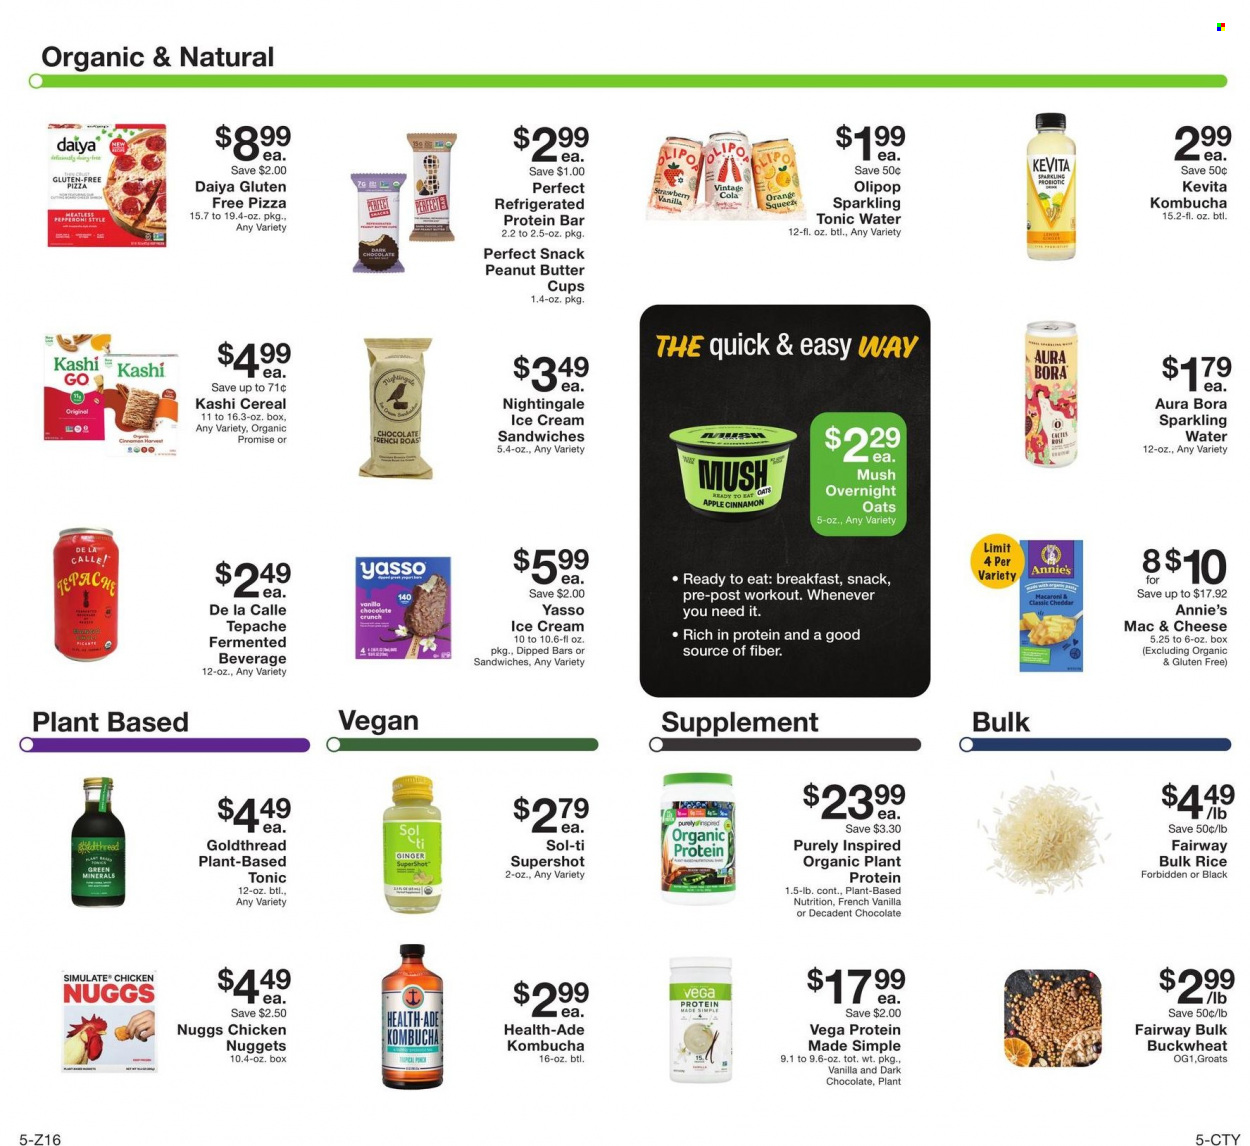 thumbnail - Fairway Market Flyer - 09/23/2022 - 09/29/2022 - Sales products - ginger, oranges, pizza, macaroni, nuggets, chicken nuggets, Annie's, pepperoni, cheddar, greek yoghurt, yoghurt, ice cream, ice cream sandwich, snack, dark chocolate, peanut butter cups, plant protein, cereals, protein bar, buckwheat, rice, cinnamon, tonic, fruit punch, sparkling water, kombucha, KeVita, wine, rosé wine, Sol. Page 5.